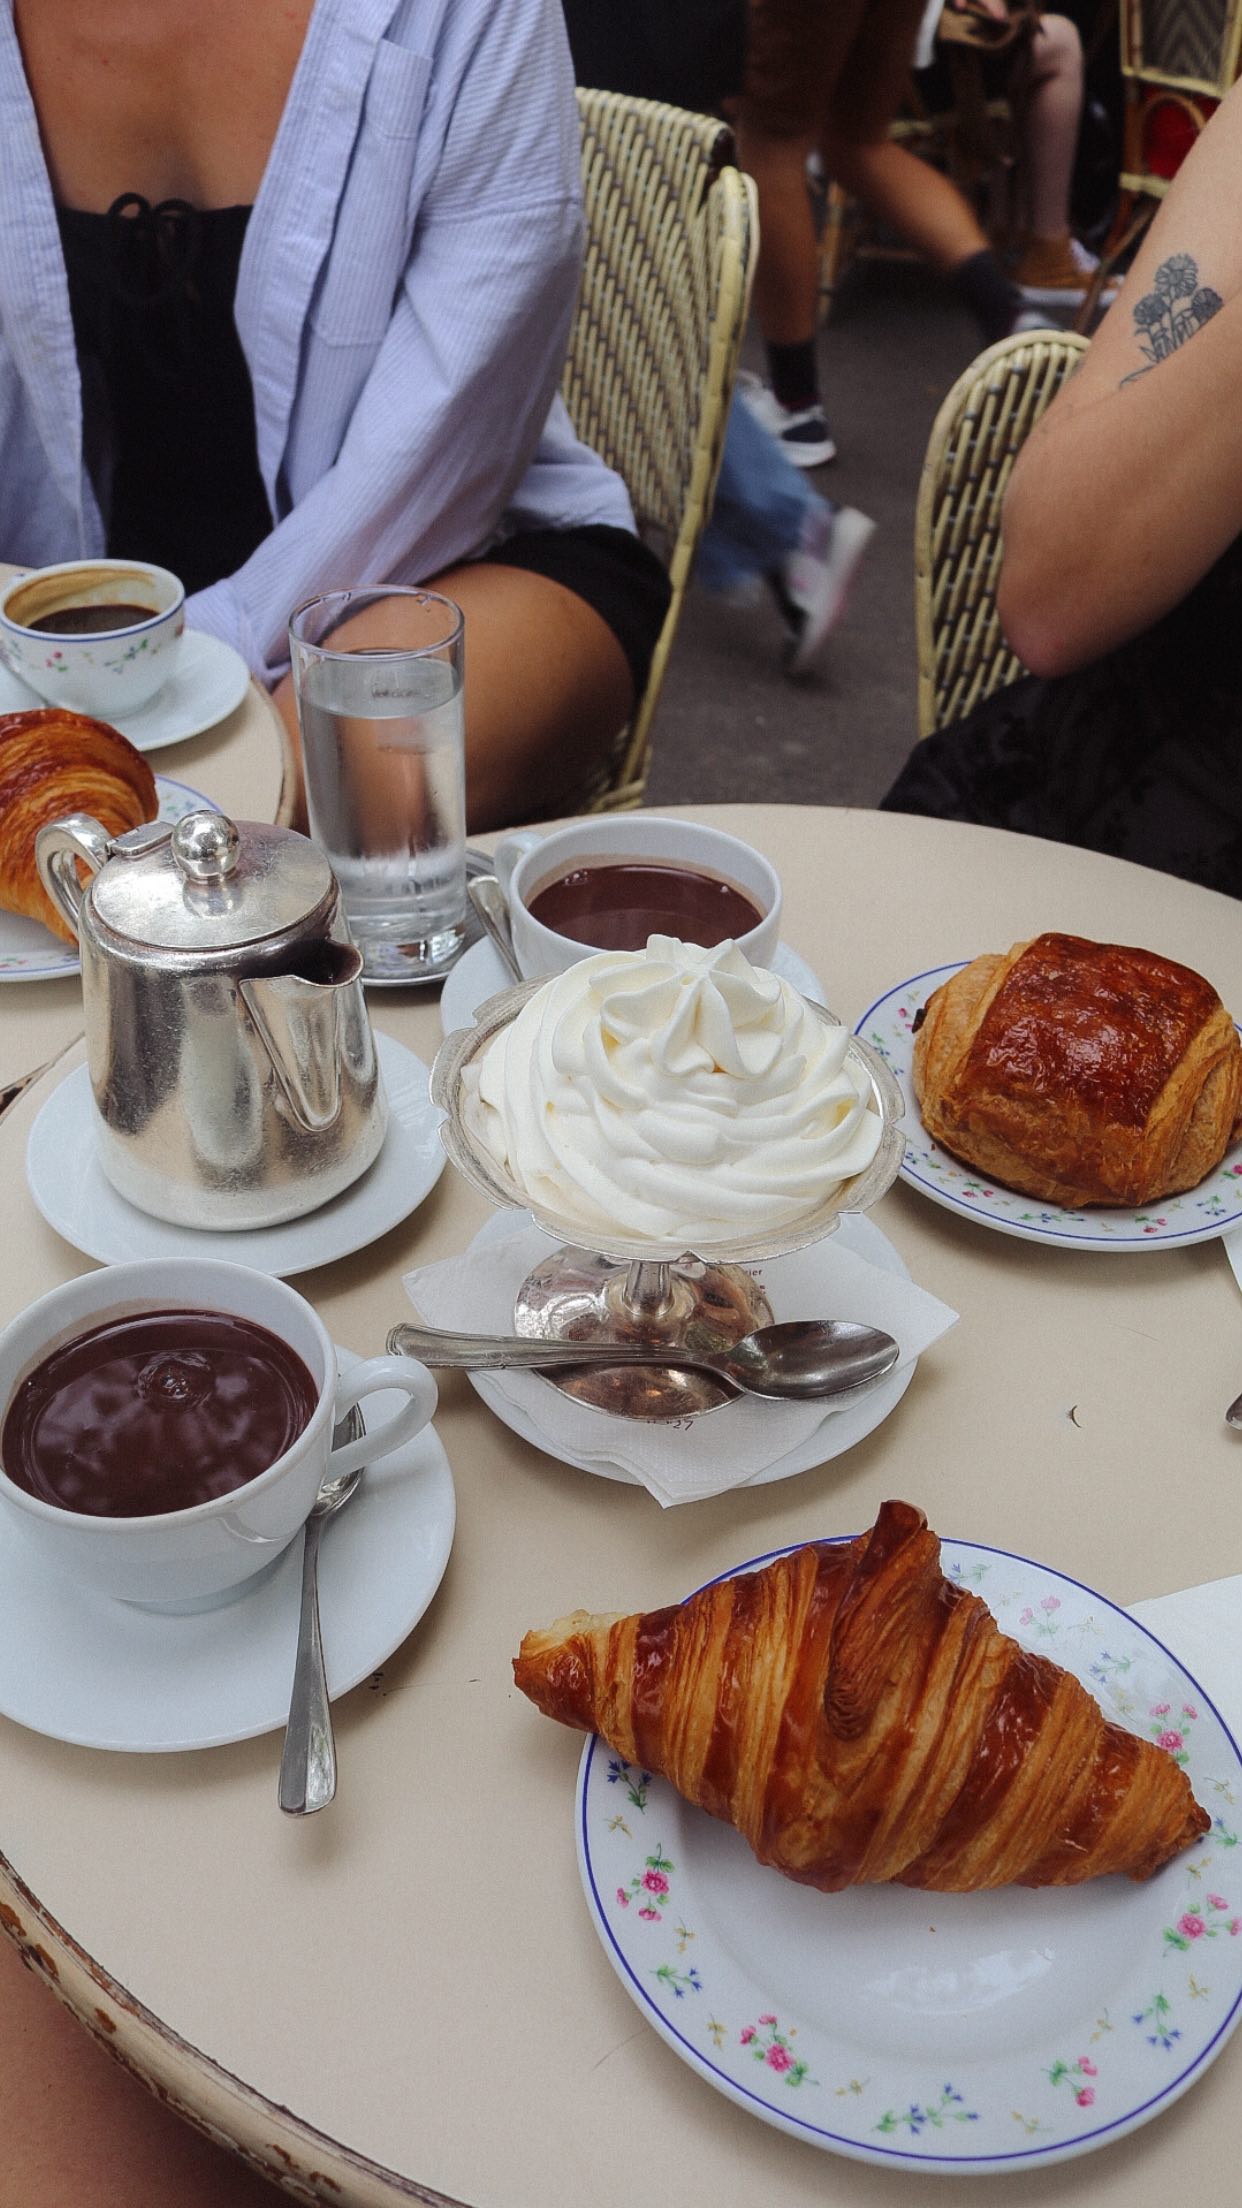 Can confirm it is worth the hype! The best hot choccy in Paris is at @caretteofficiel on Trocadero ðŸ˜�ðŸ˜�ðŸ�«